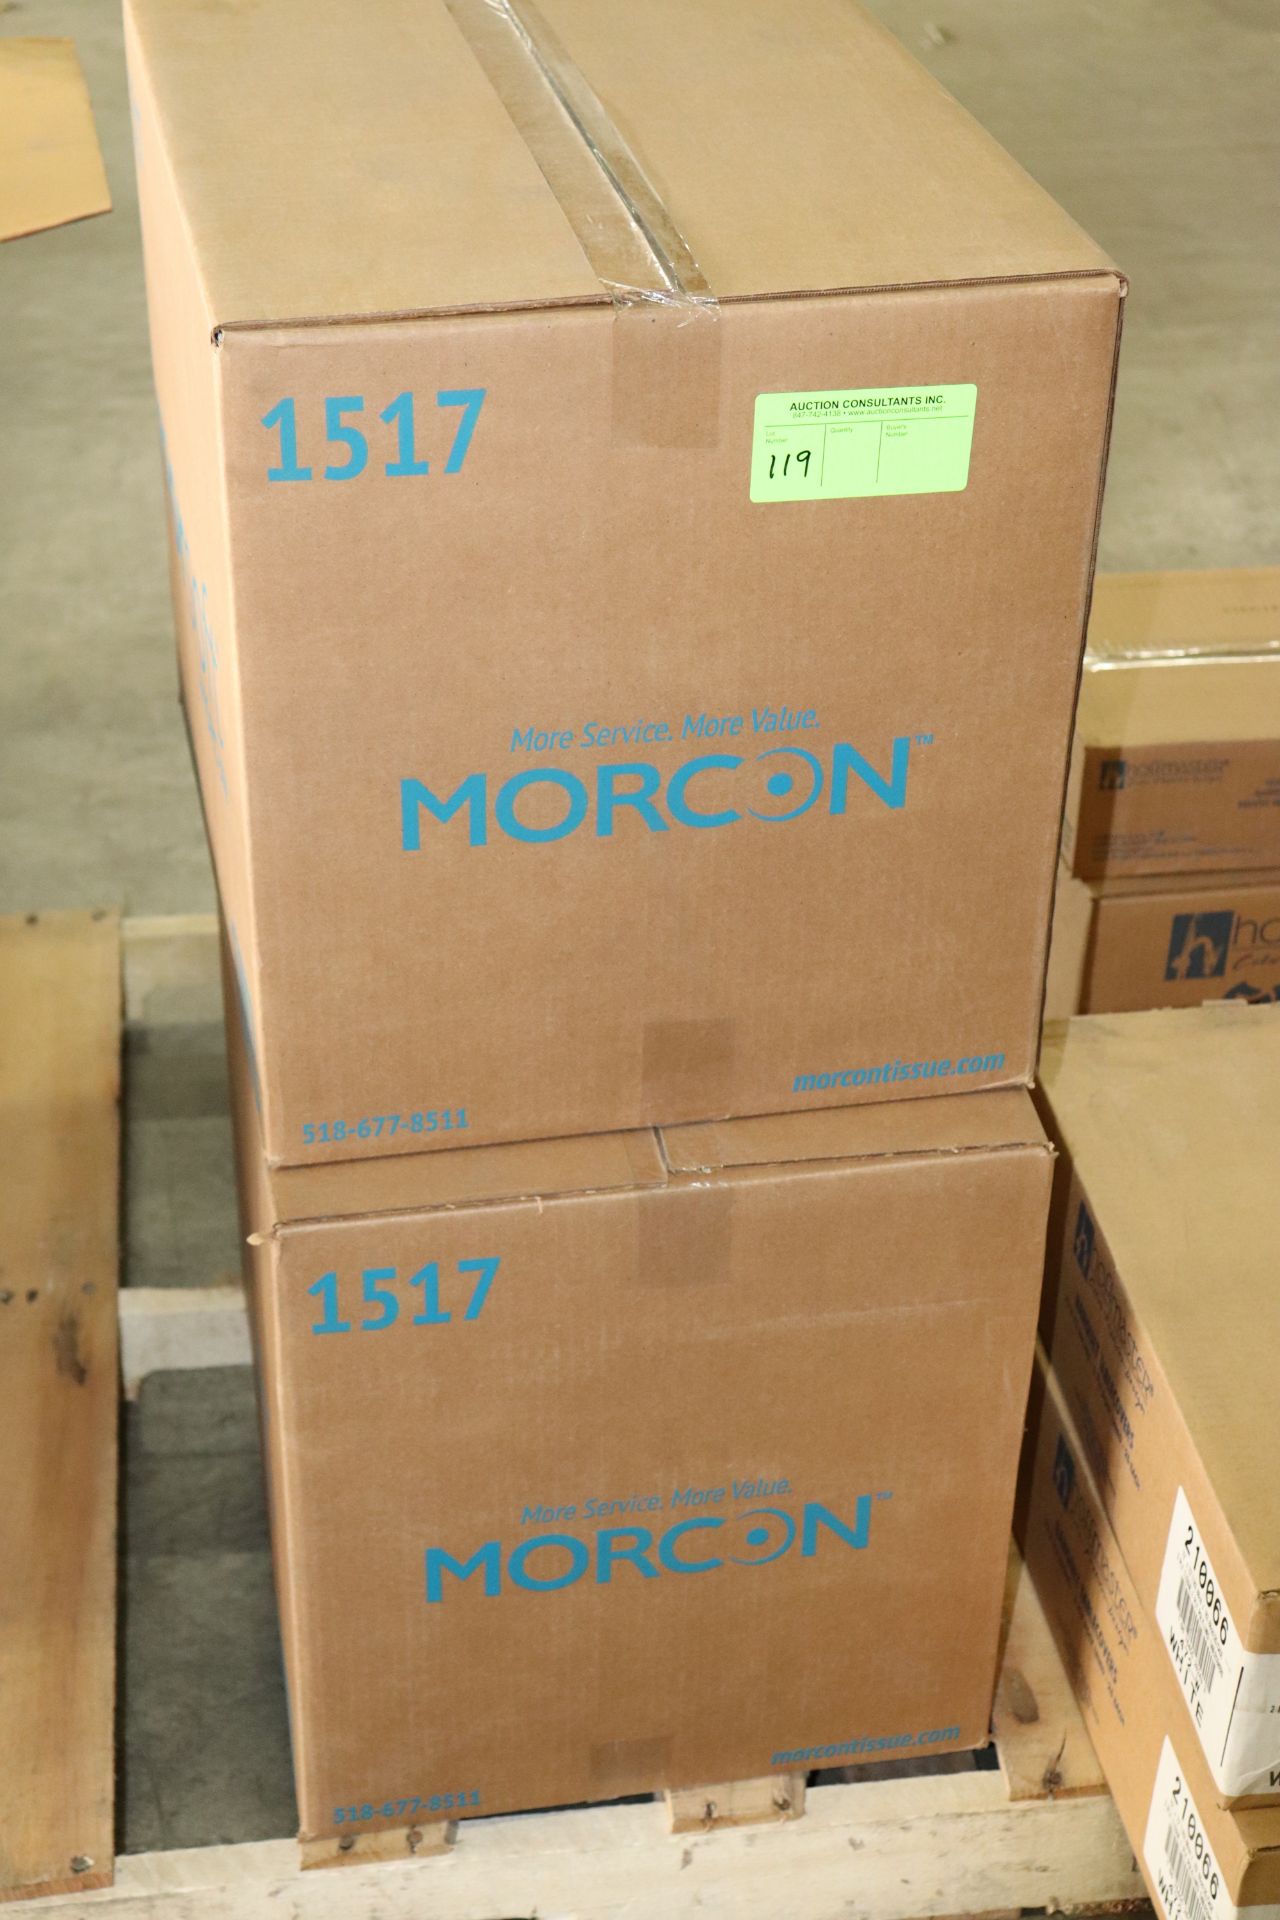 Two cases of Morcon 1-ply dinner napkins, 4500 per case